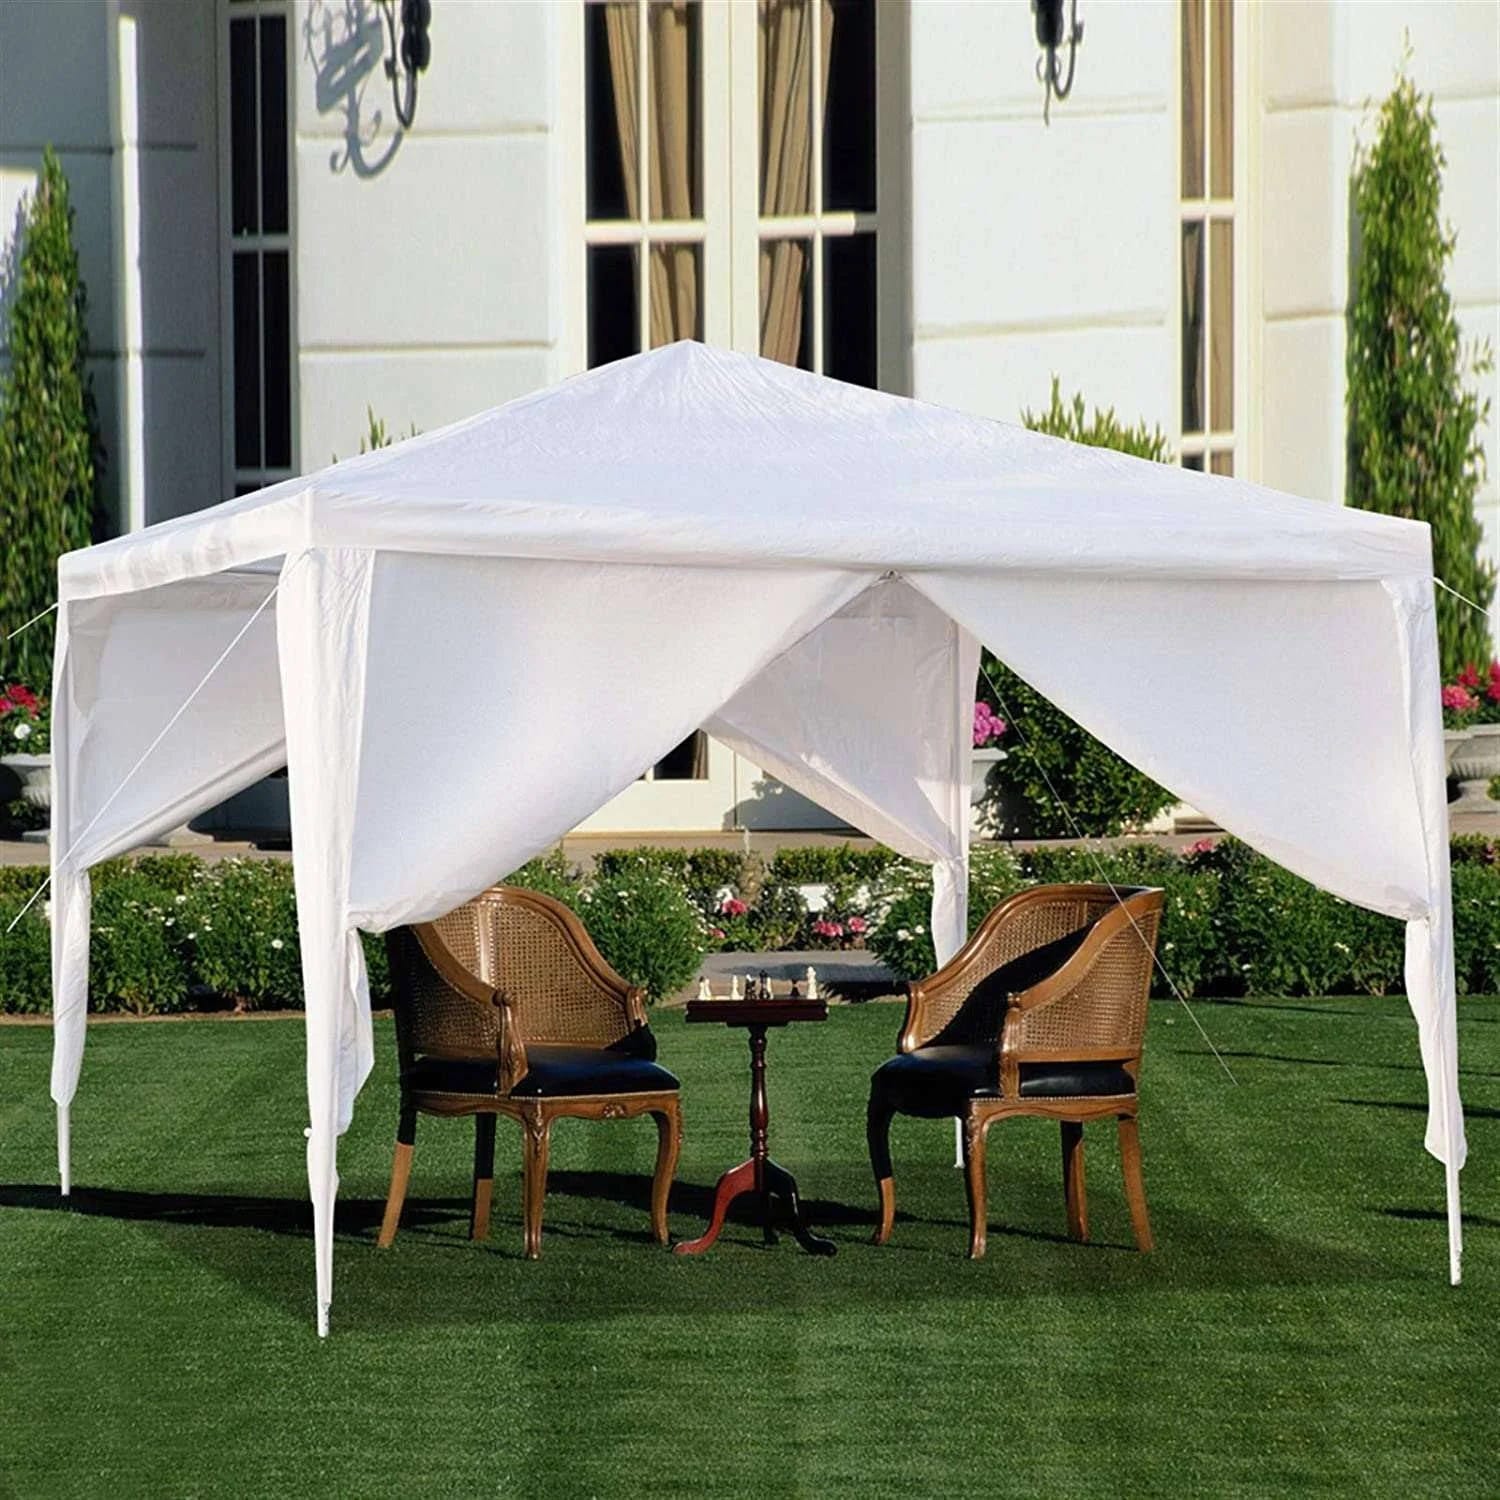 10'x10' Canopy Wedding Party Tent Gazebo with 4 Side Walls | Image